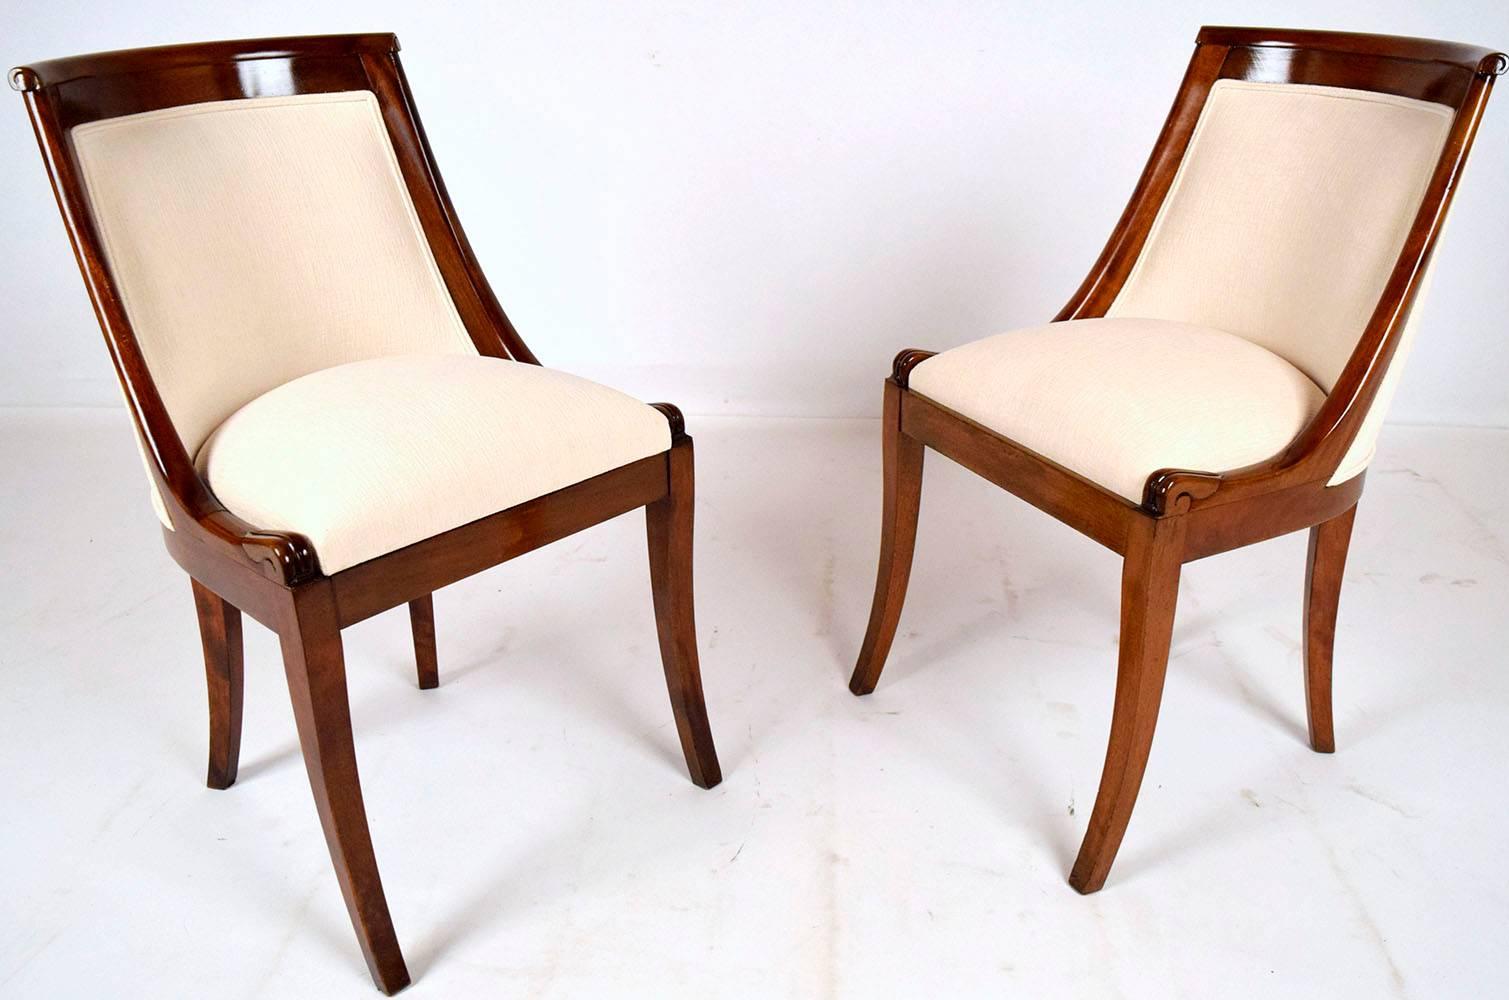 Carved Set of 8 Mahogany Empire Dining Chairs